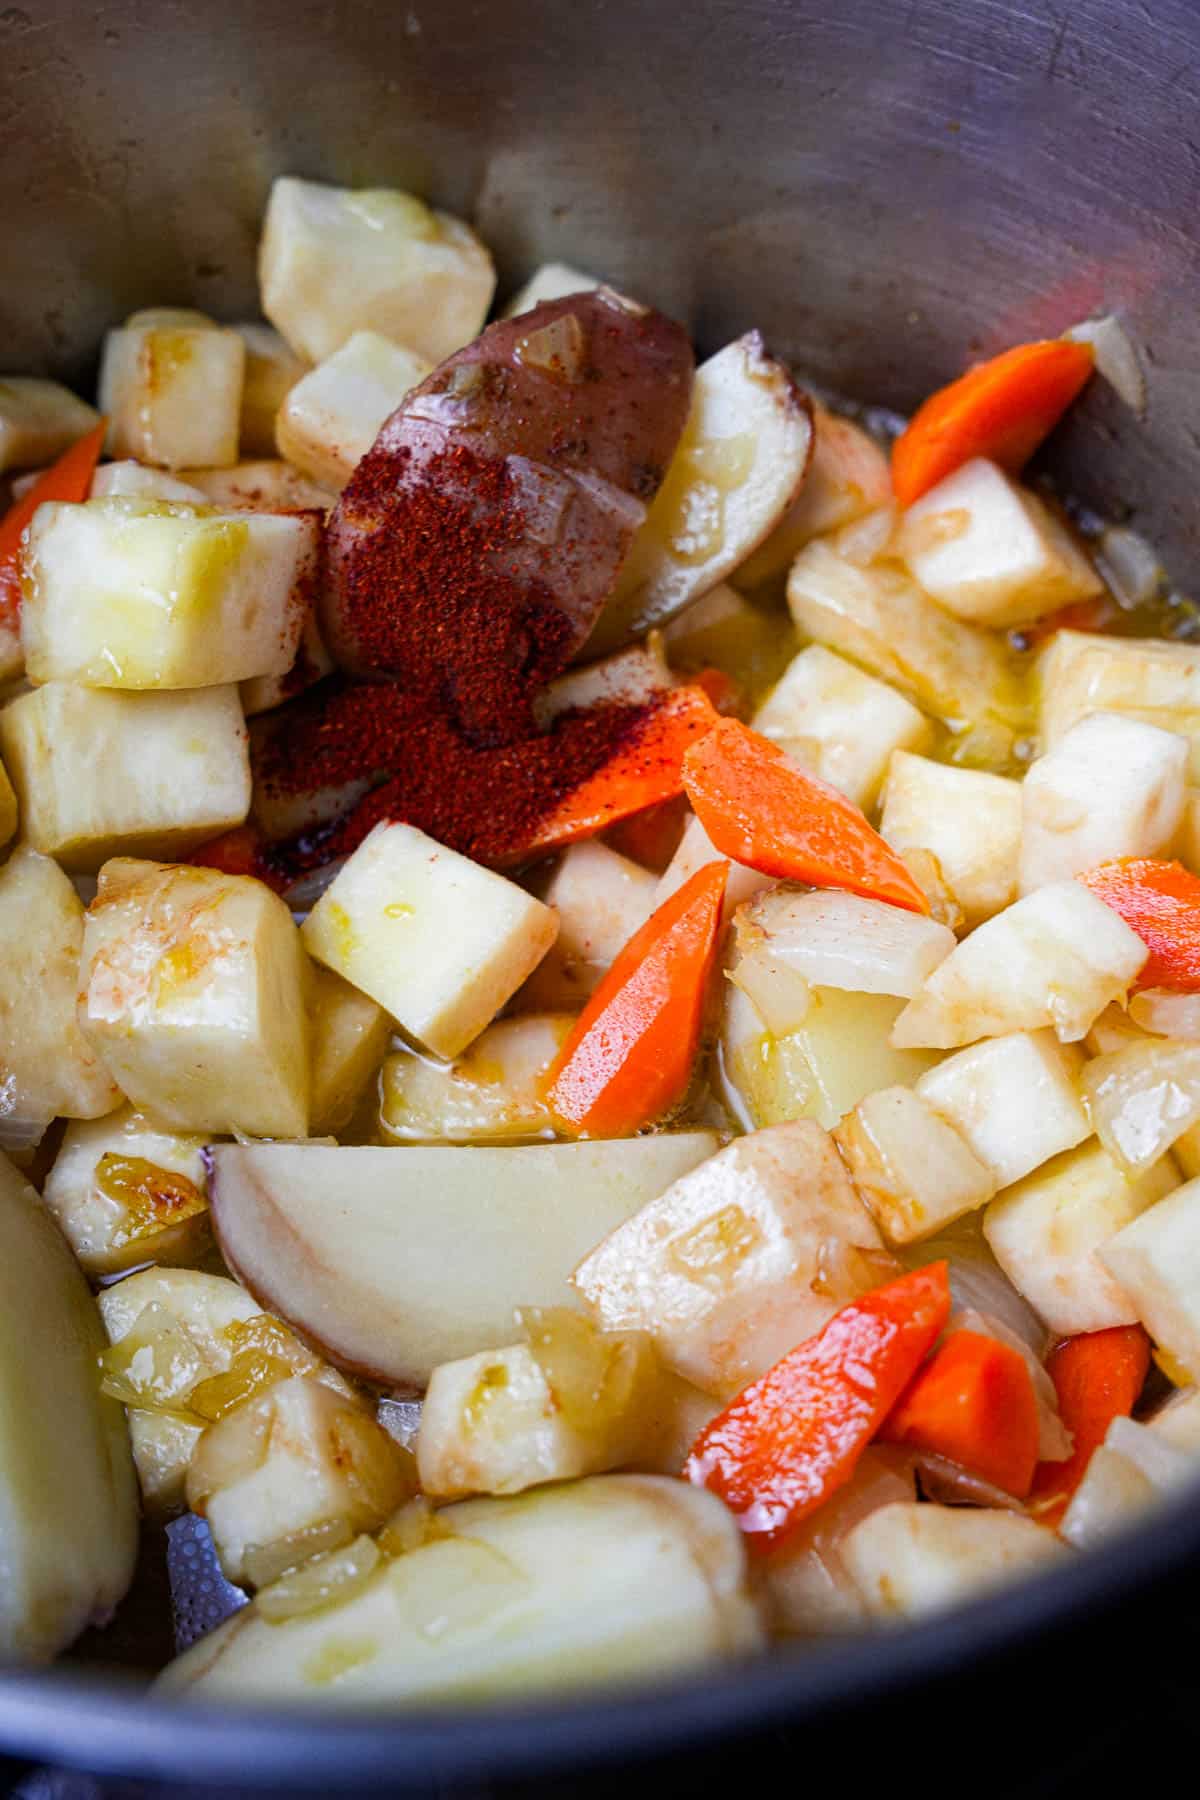 Liquid ingredients and paprika are added to the cooking vegetables in a stainless steel pot.